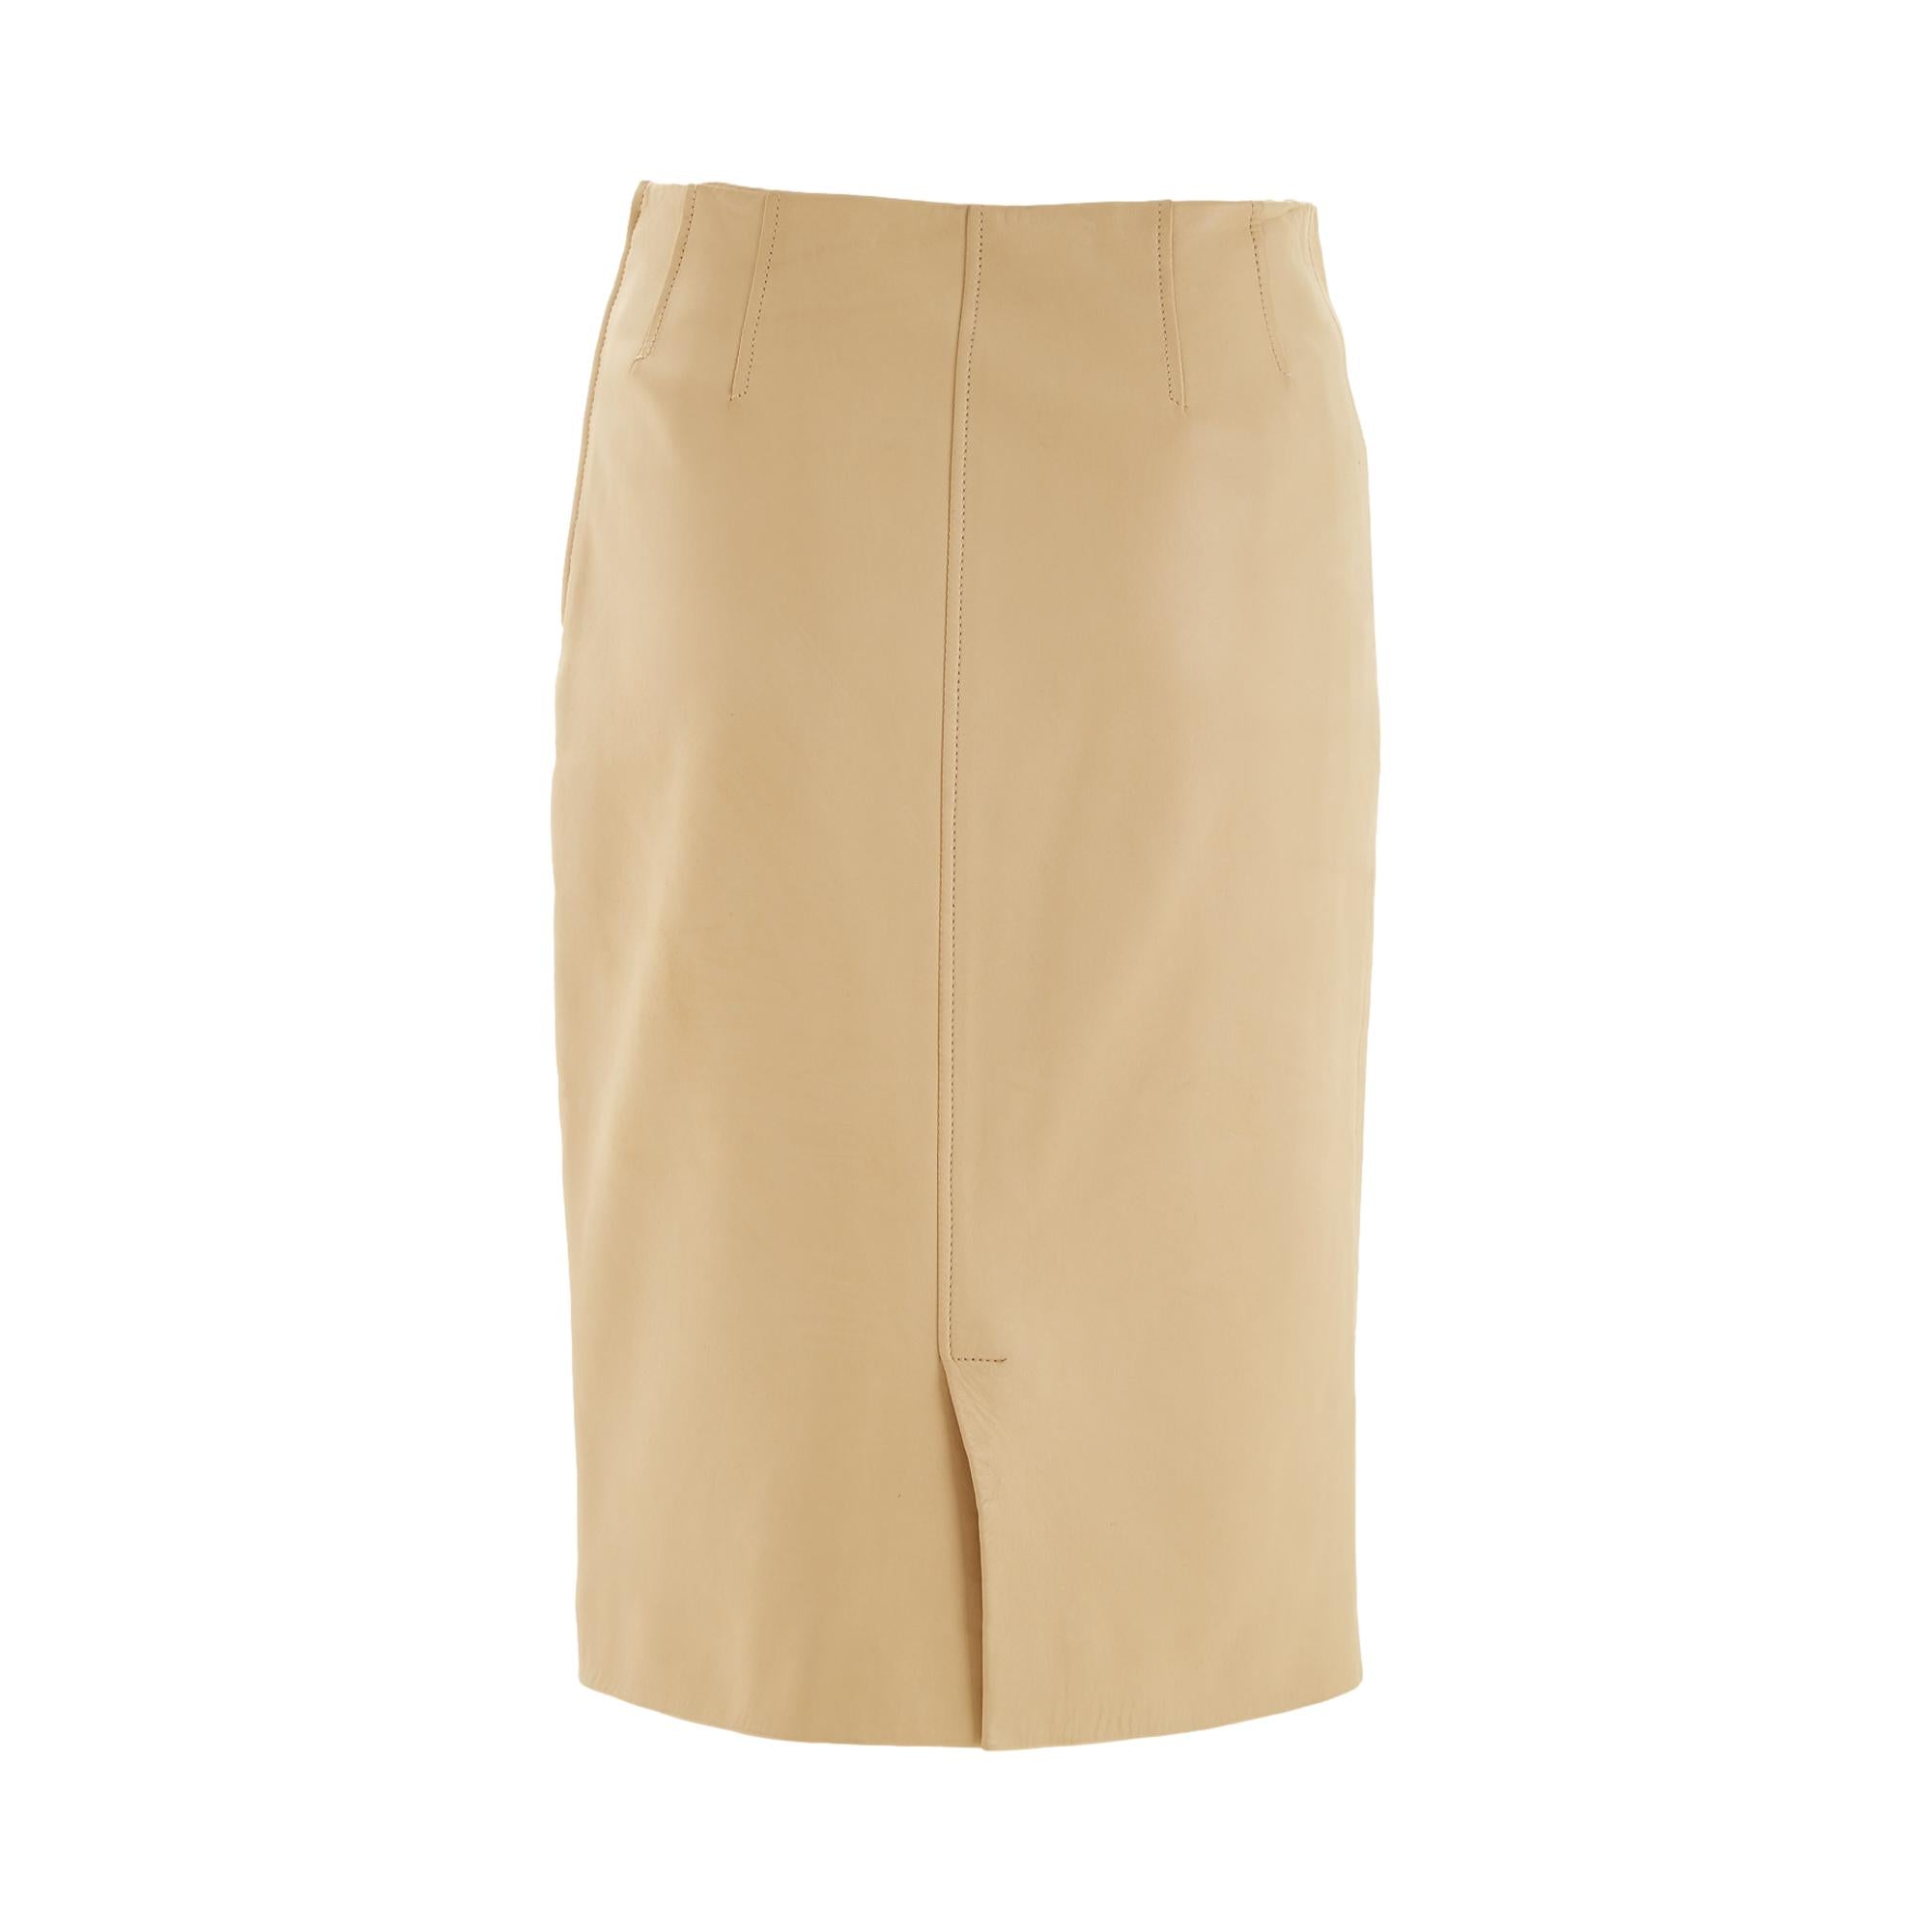 Gucci Beige Leather Skirt